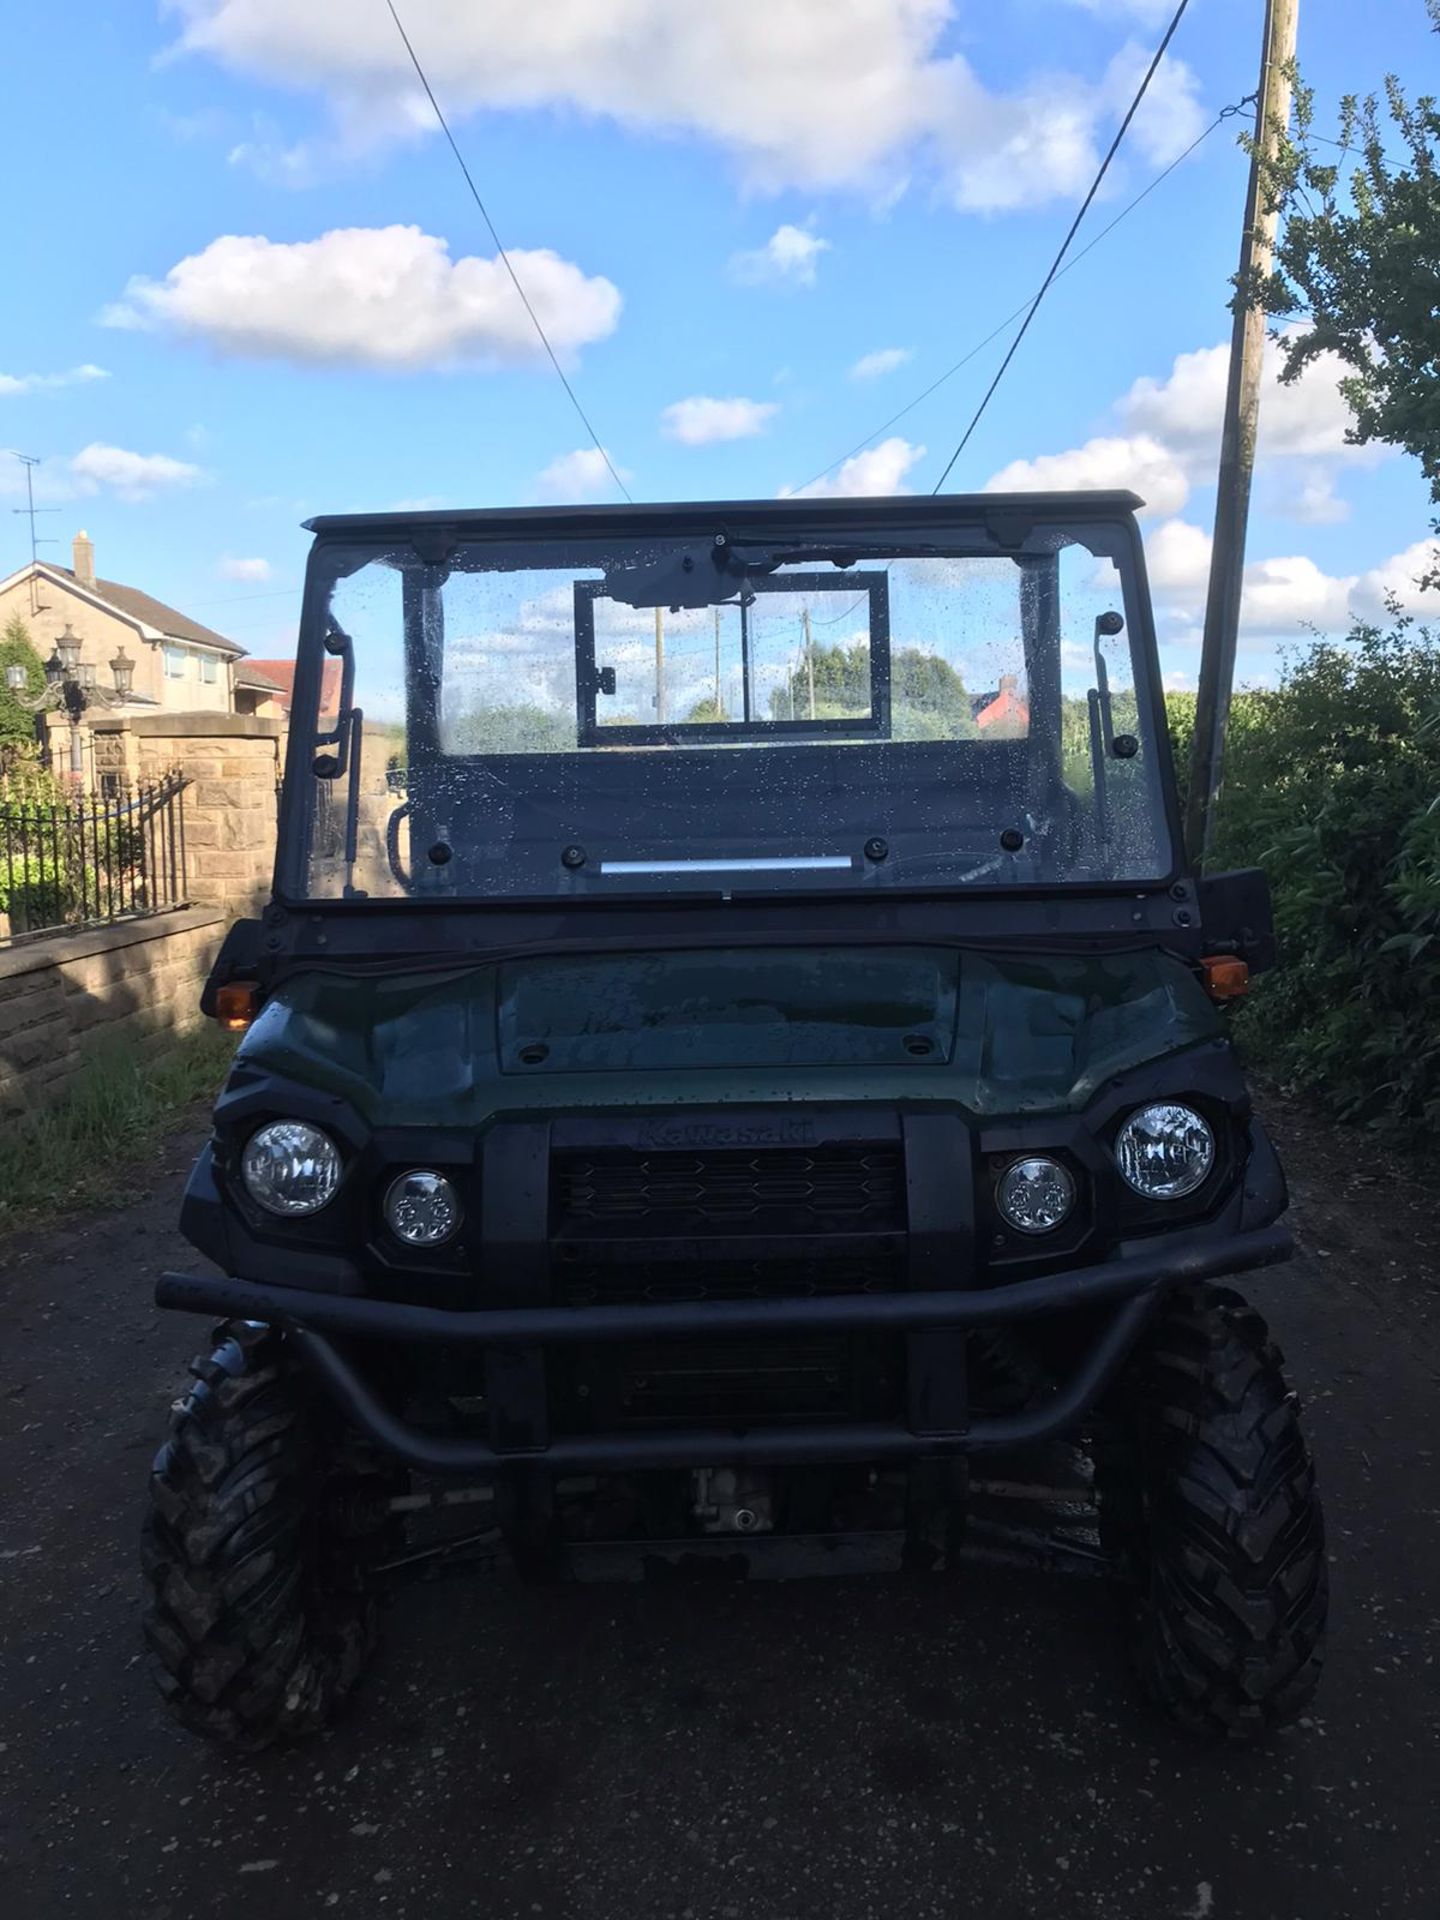 2016 KAWASAKI MULE PRO DX, ROAD REGISTERED, RUNS AND DRIVES WELL, TIPPER BODY *PLUS VAT* - Image 4 of 5